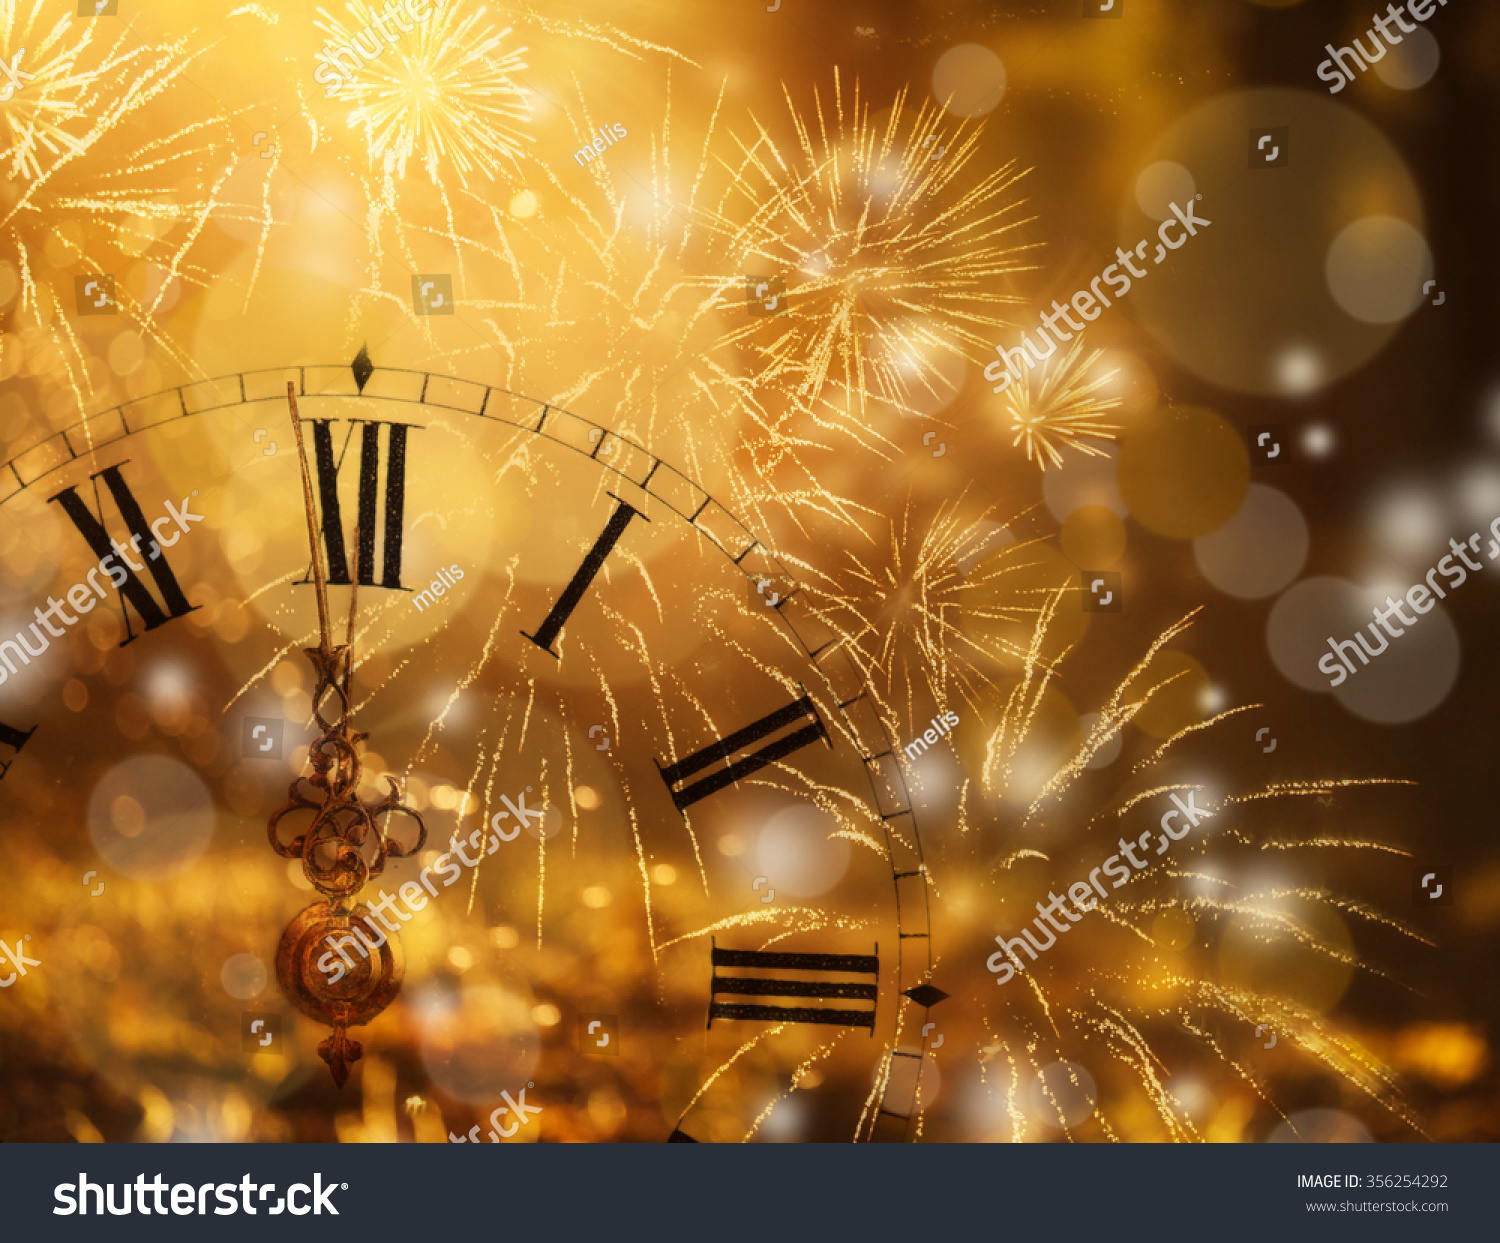 New Year's at midnight - Old clock with fireworks and holiday lights #356254292